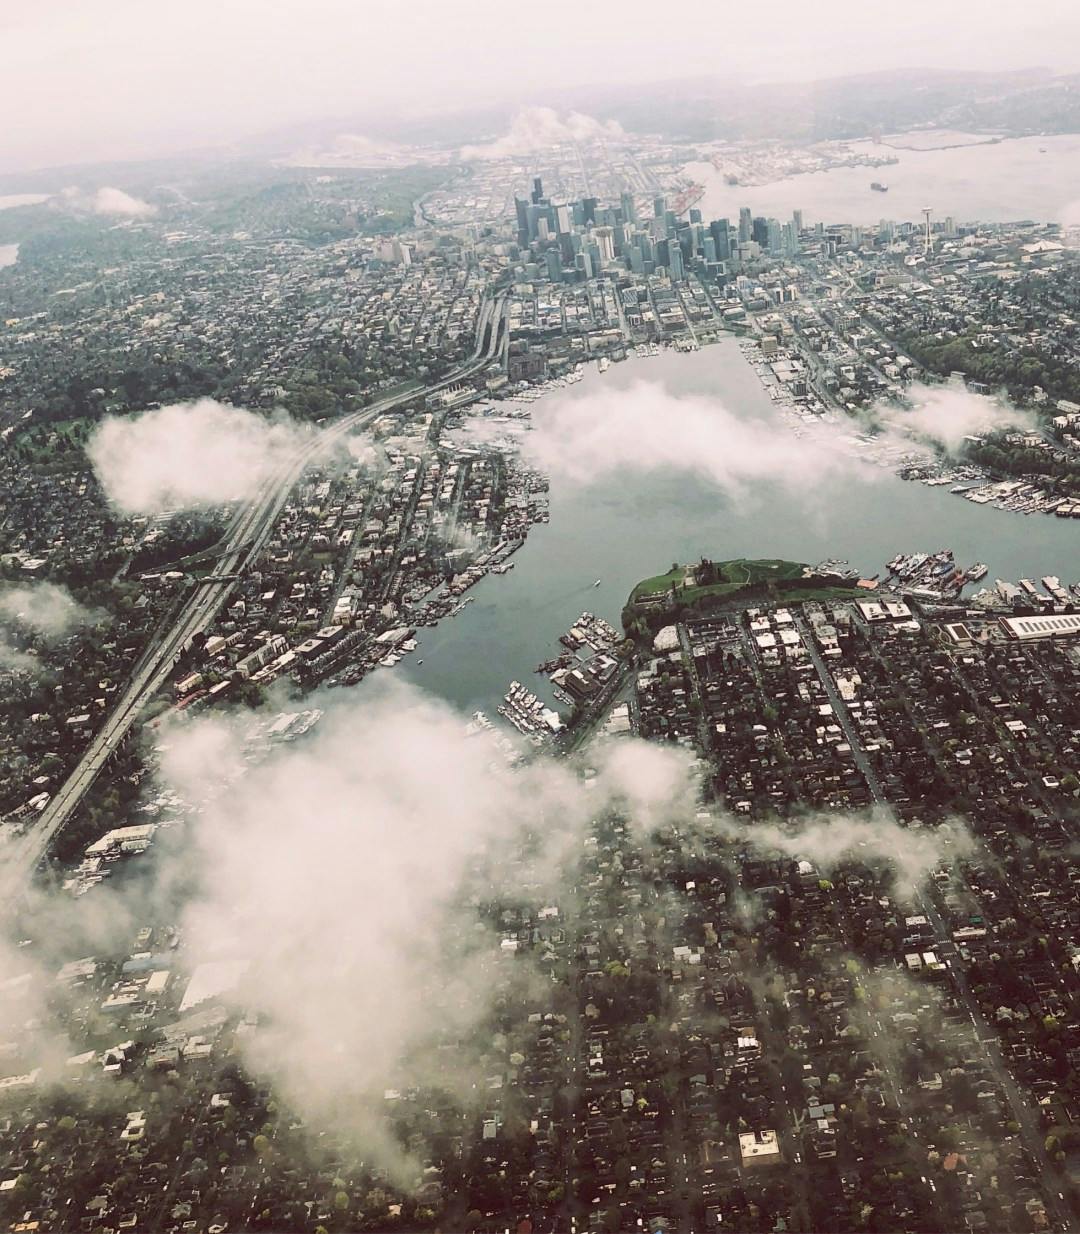 An Aerial view of Seattle